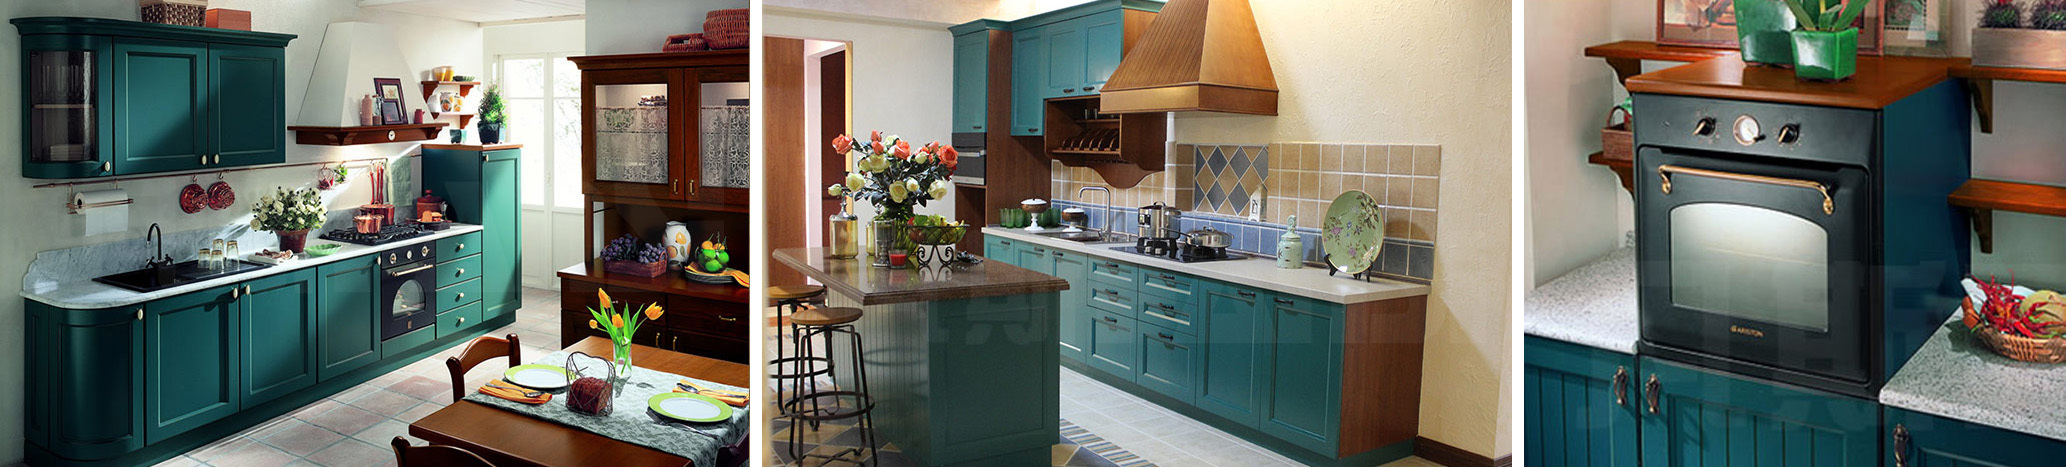 Blue and wood kitchen cabinet